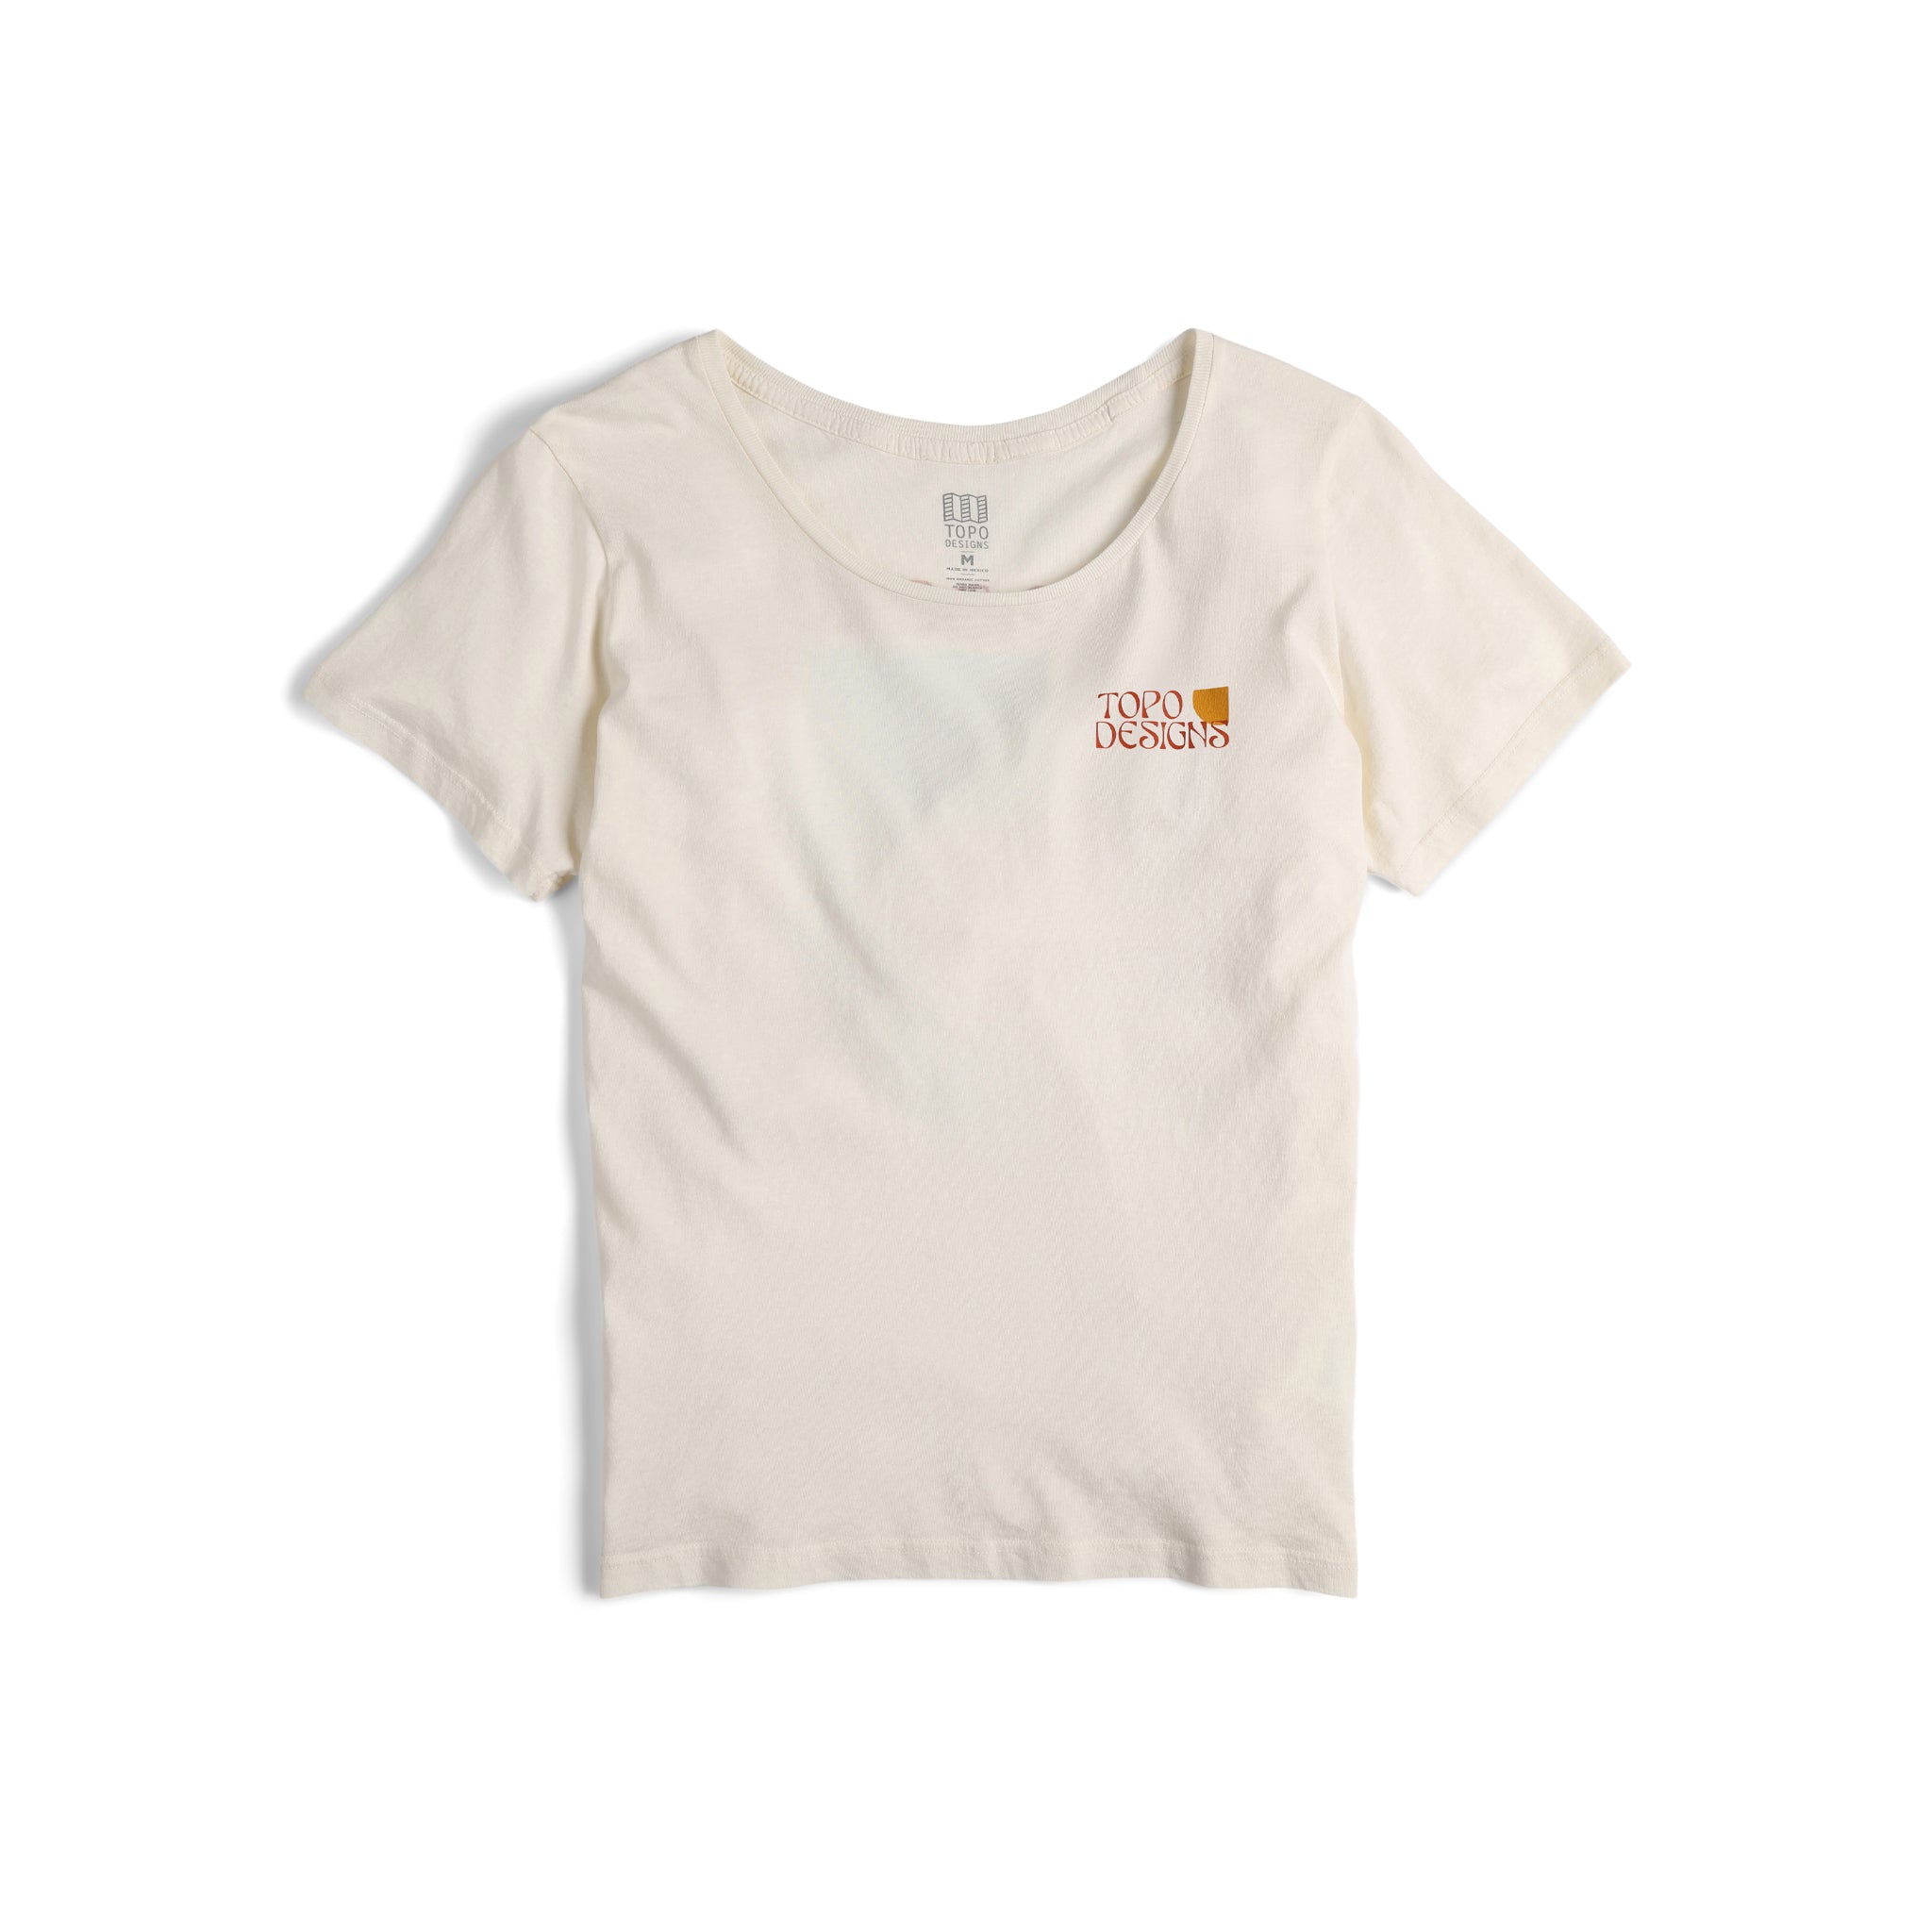 Front view of Topo Designs Women's Canyons Tee 100% organic cotton short sleeve graphic logo t-shirt in "natural" white.